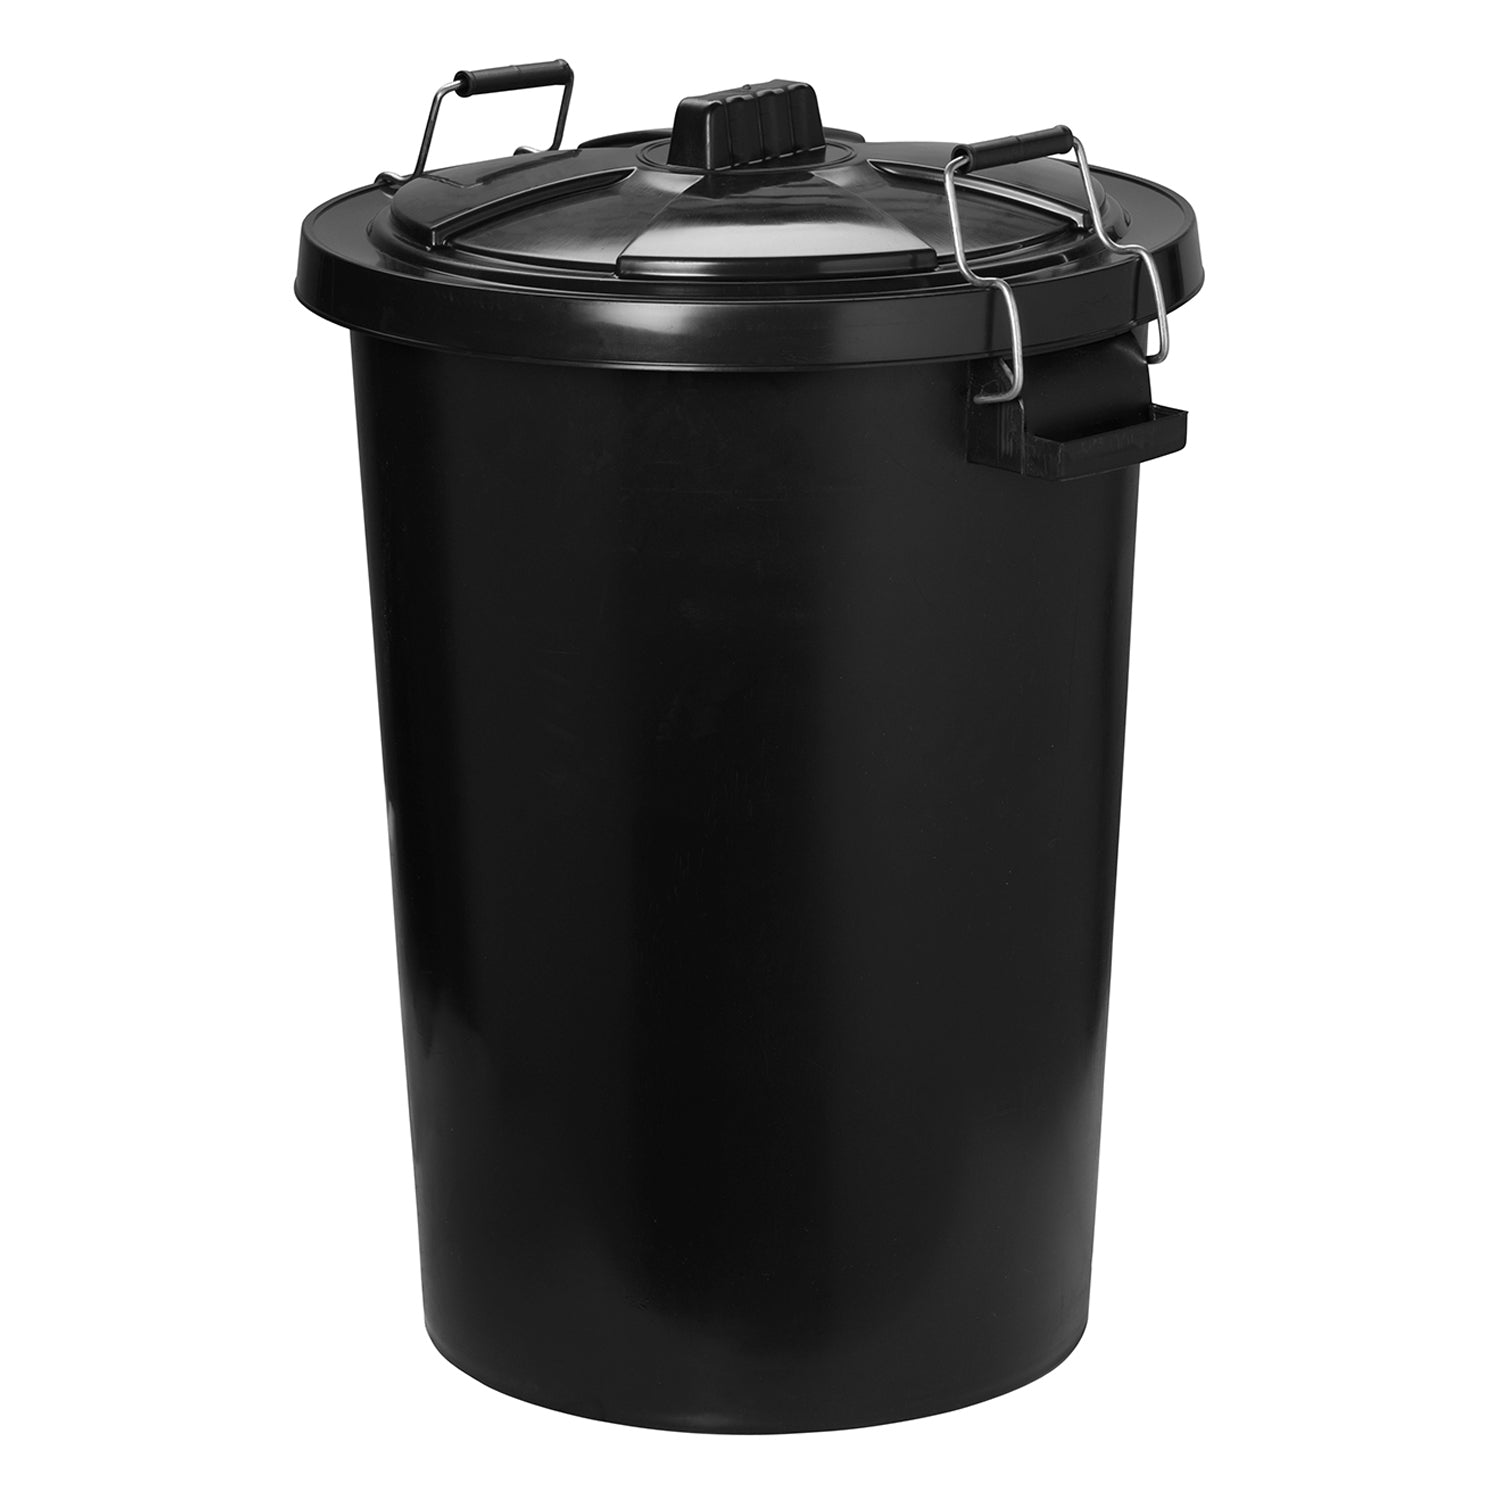 Prostable Dustbin With Locking Lid - Black 85L